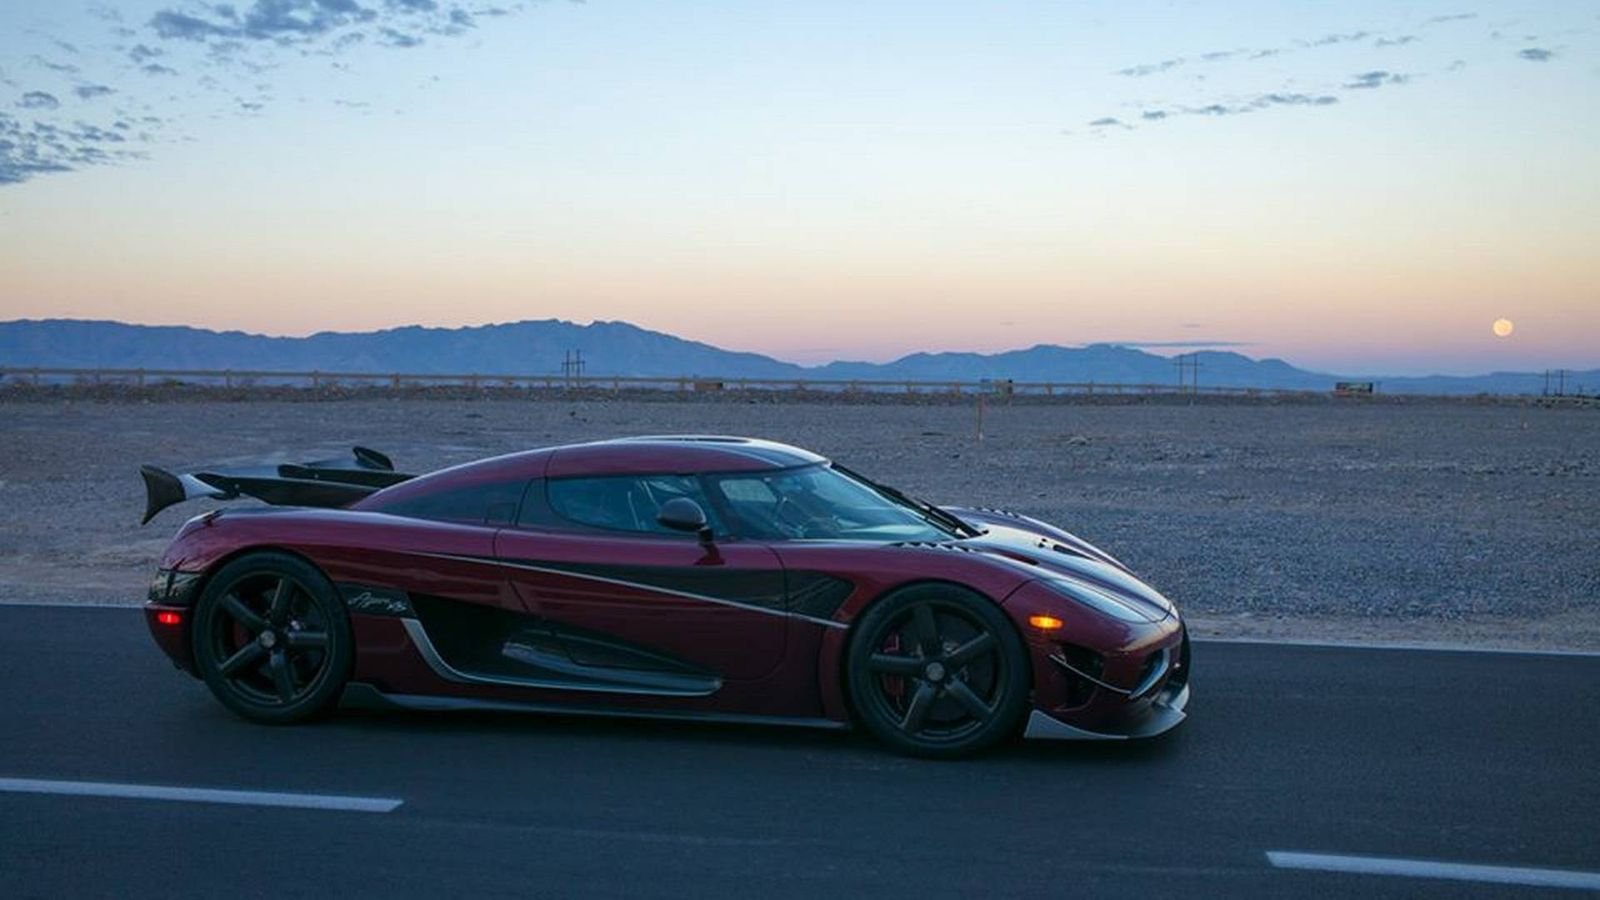 koenigsegg-agera-rs-sets-new-record-for-fastest-production-car-1--9494